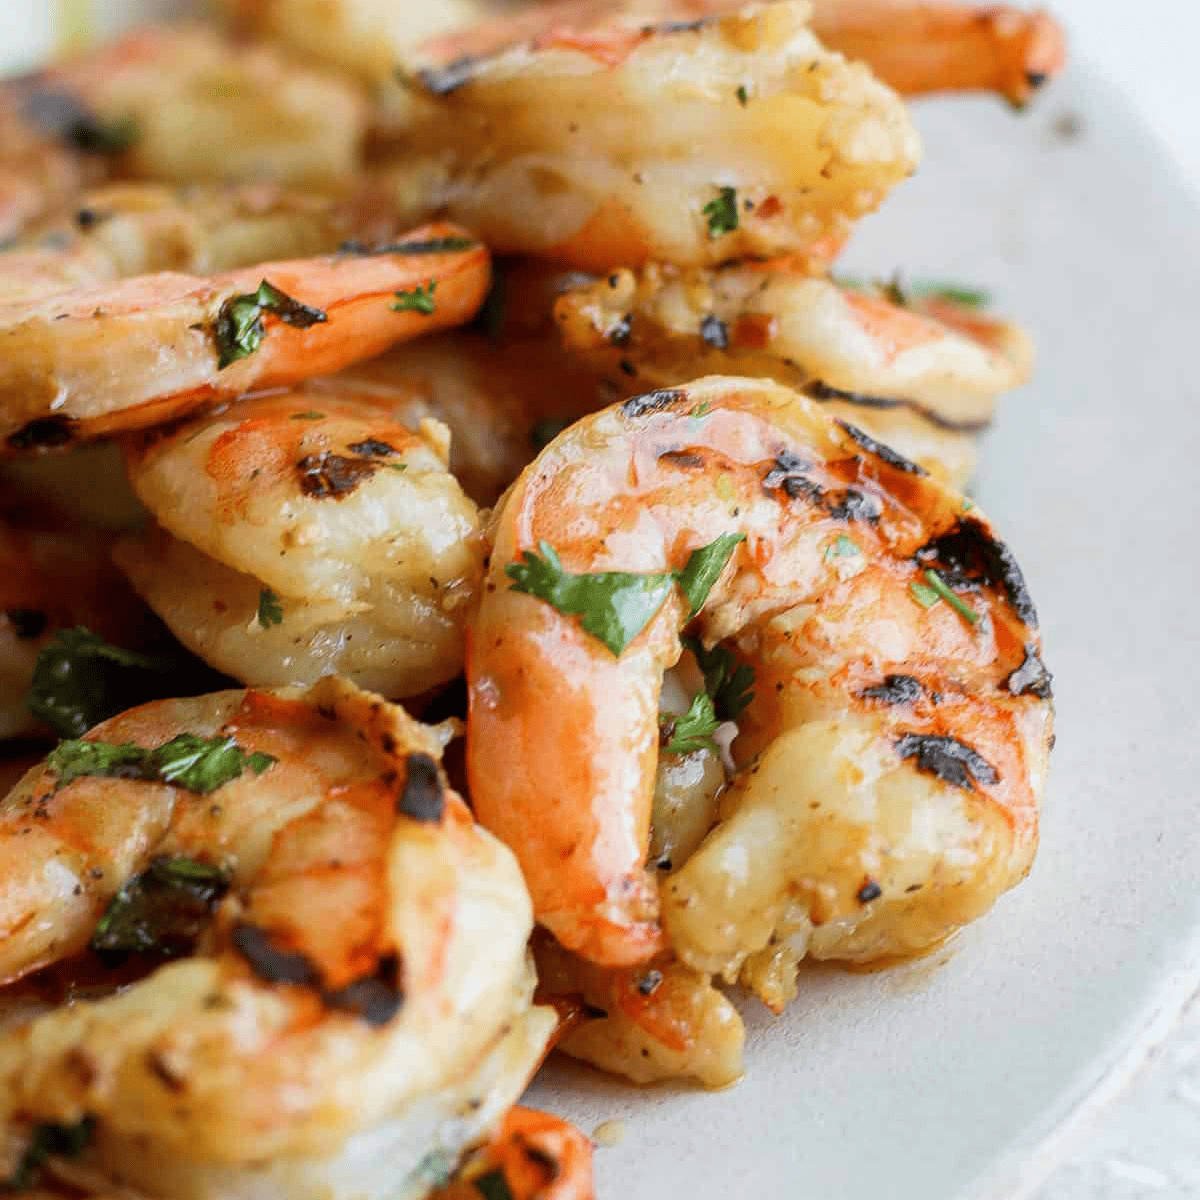 Grilled shrimp on a plate with lemon wedges, marinated.